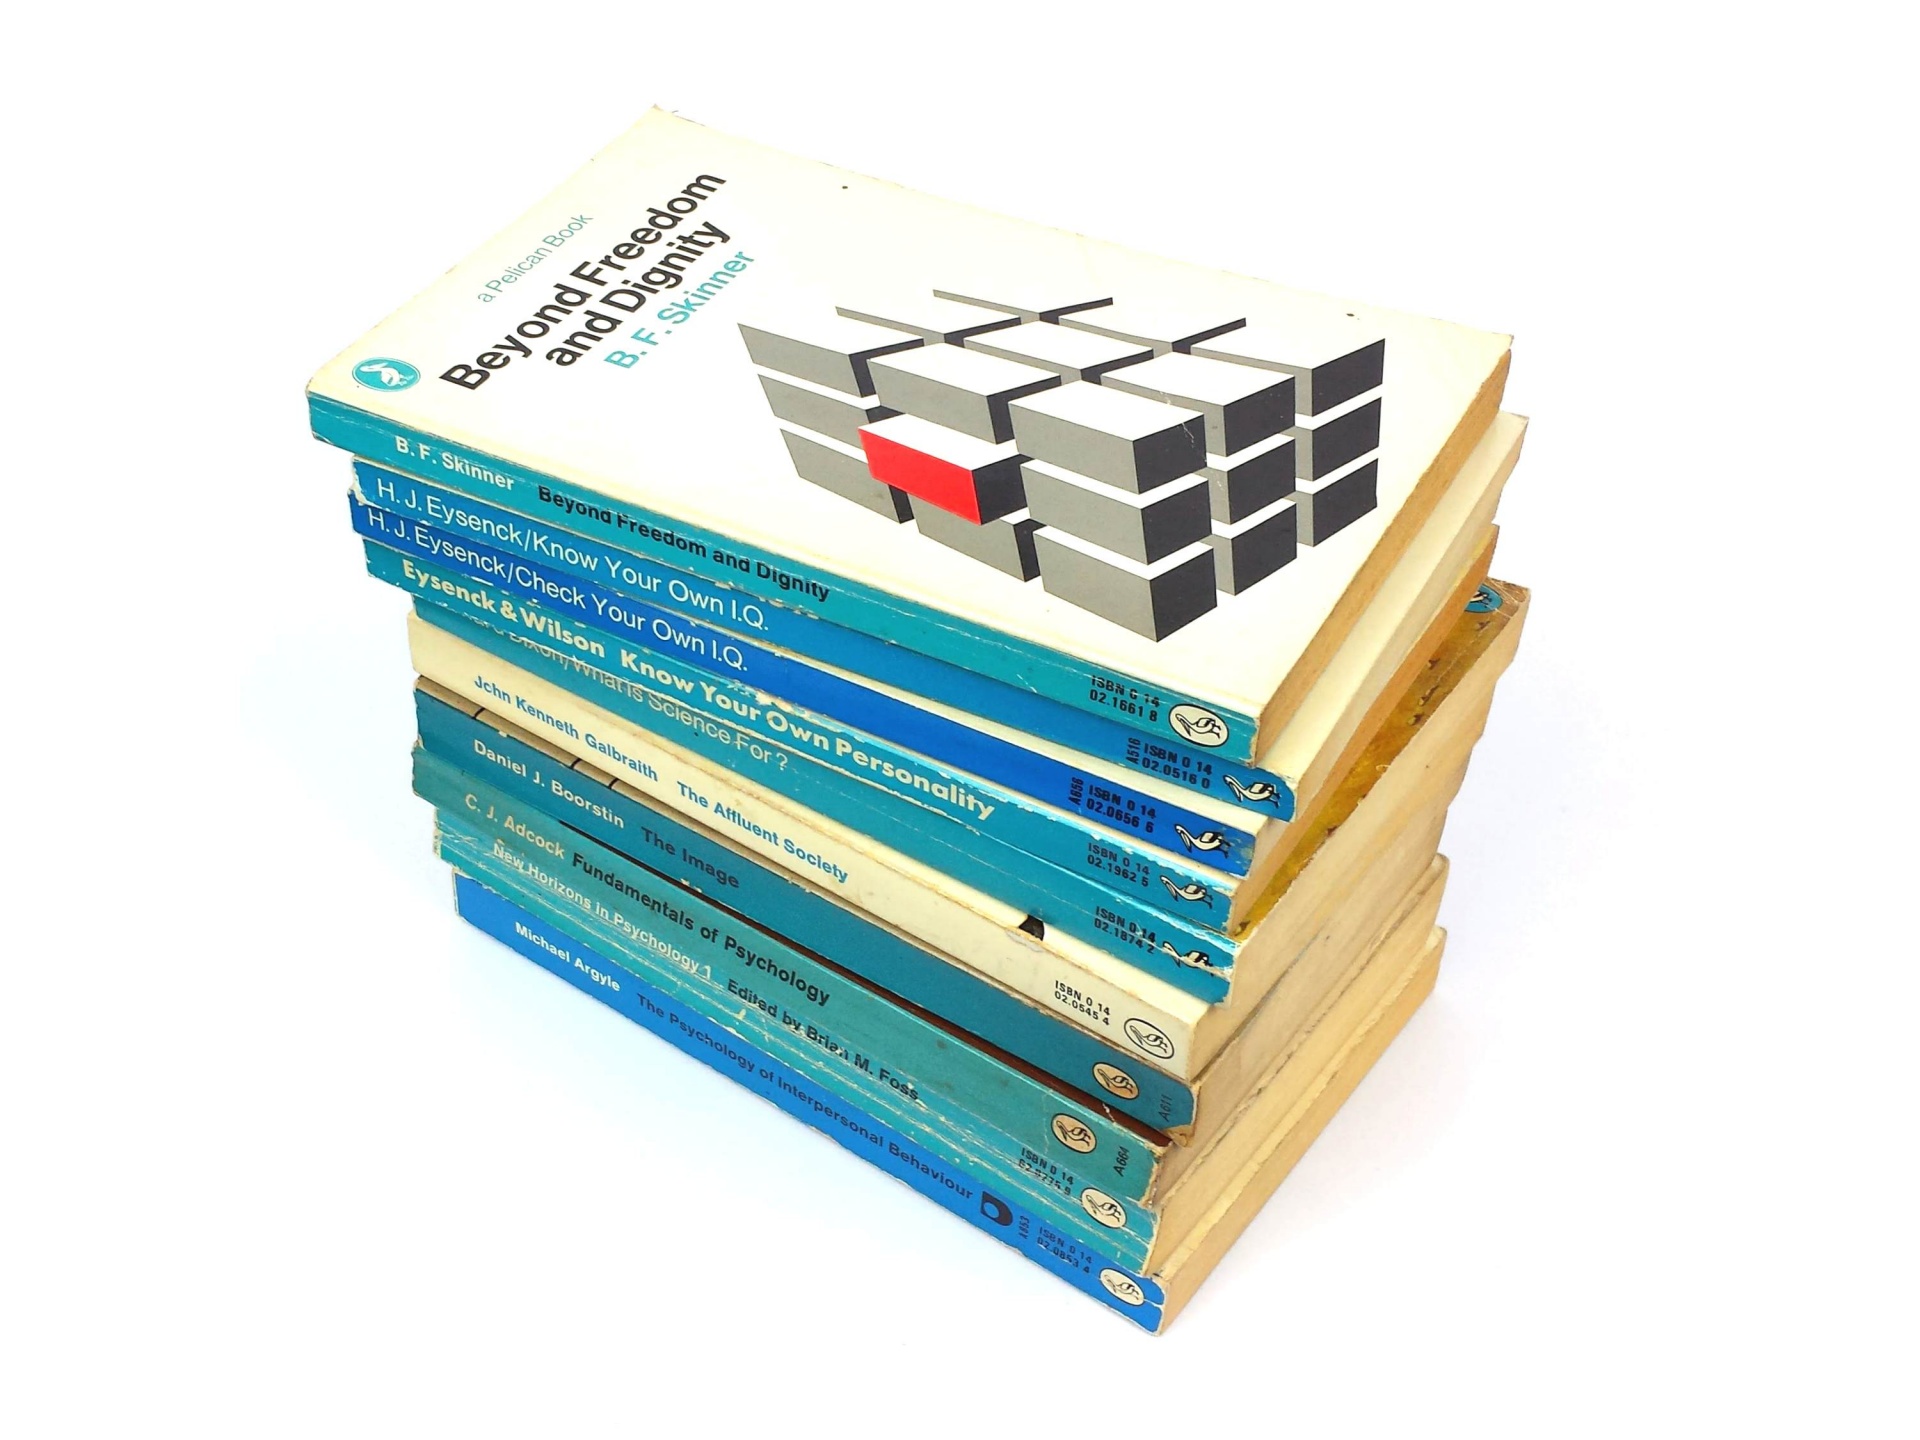 A collection of classic Pelican psychology paperbacks on a white background